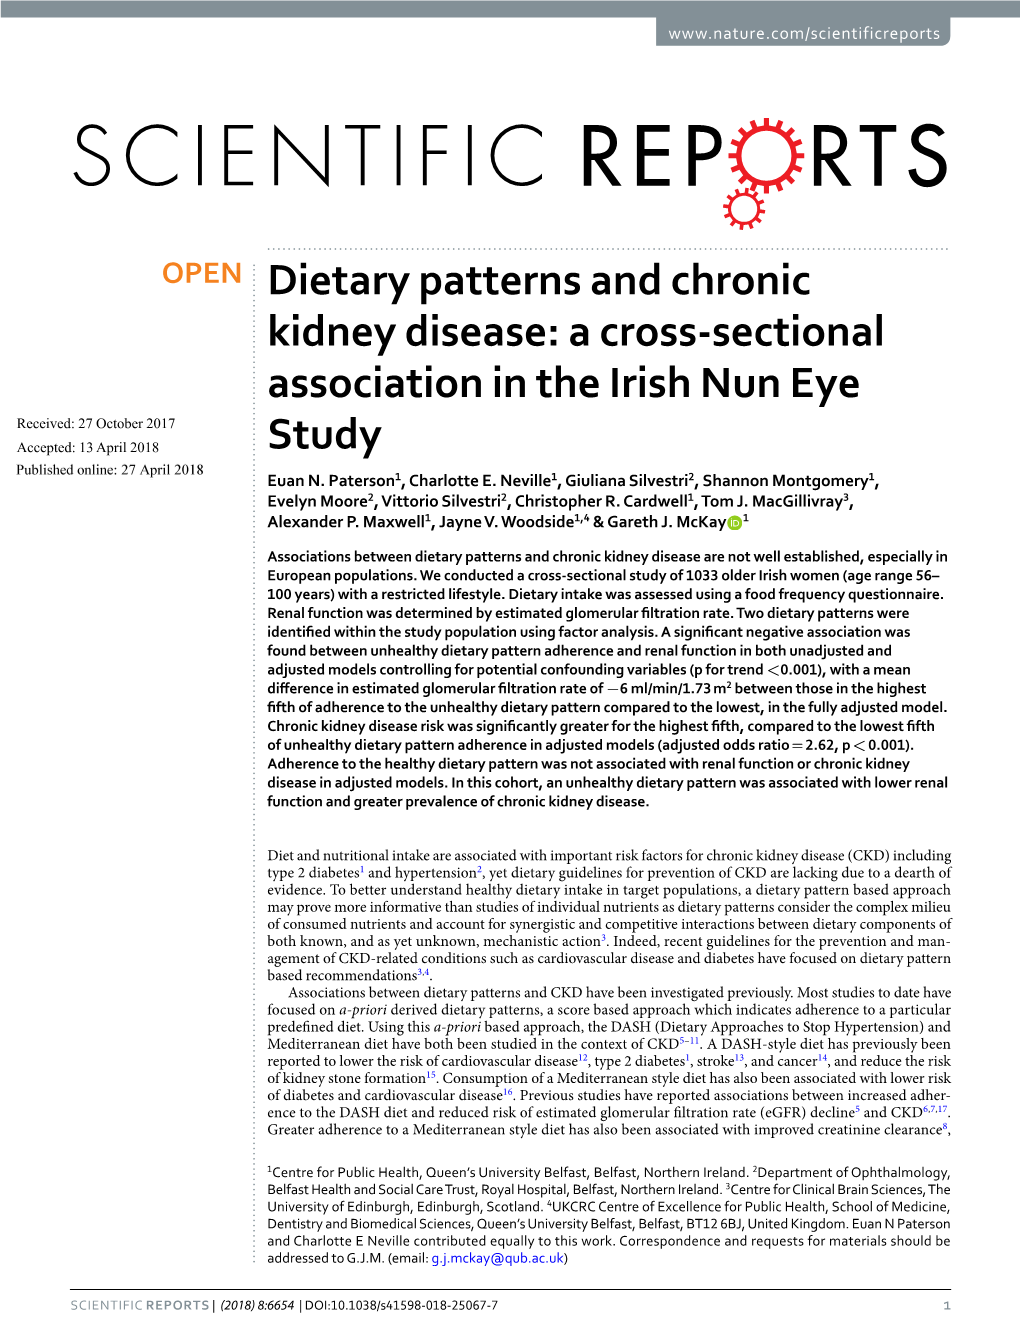 Dietary Patterns and Chronic Kidney Disease: a Cross-Sectional